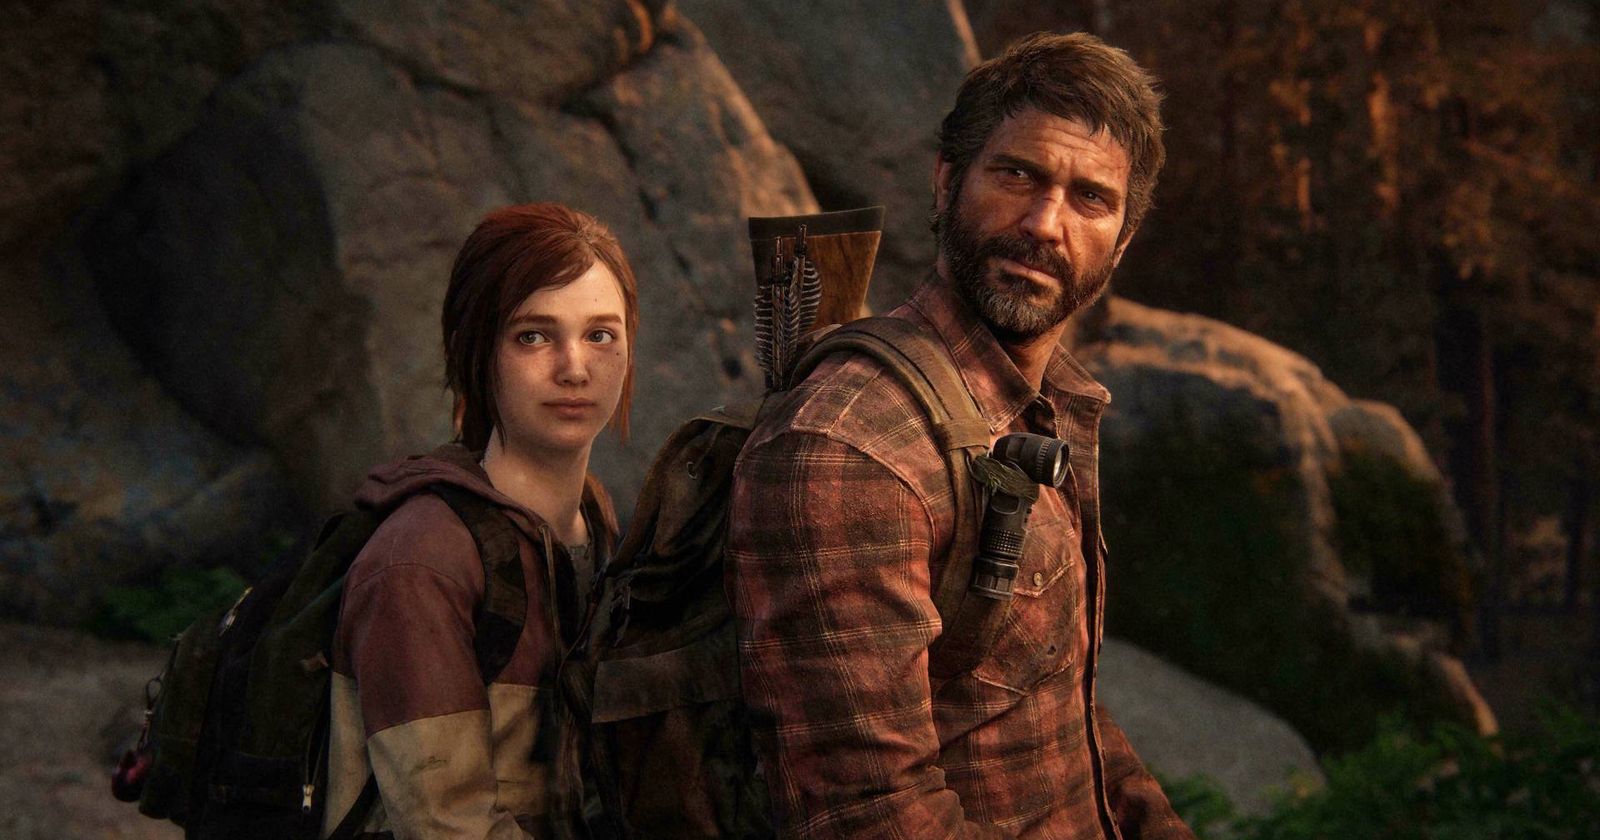 The Last of Us 1: Does It Have Multiplayer?